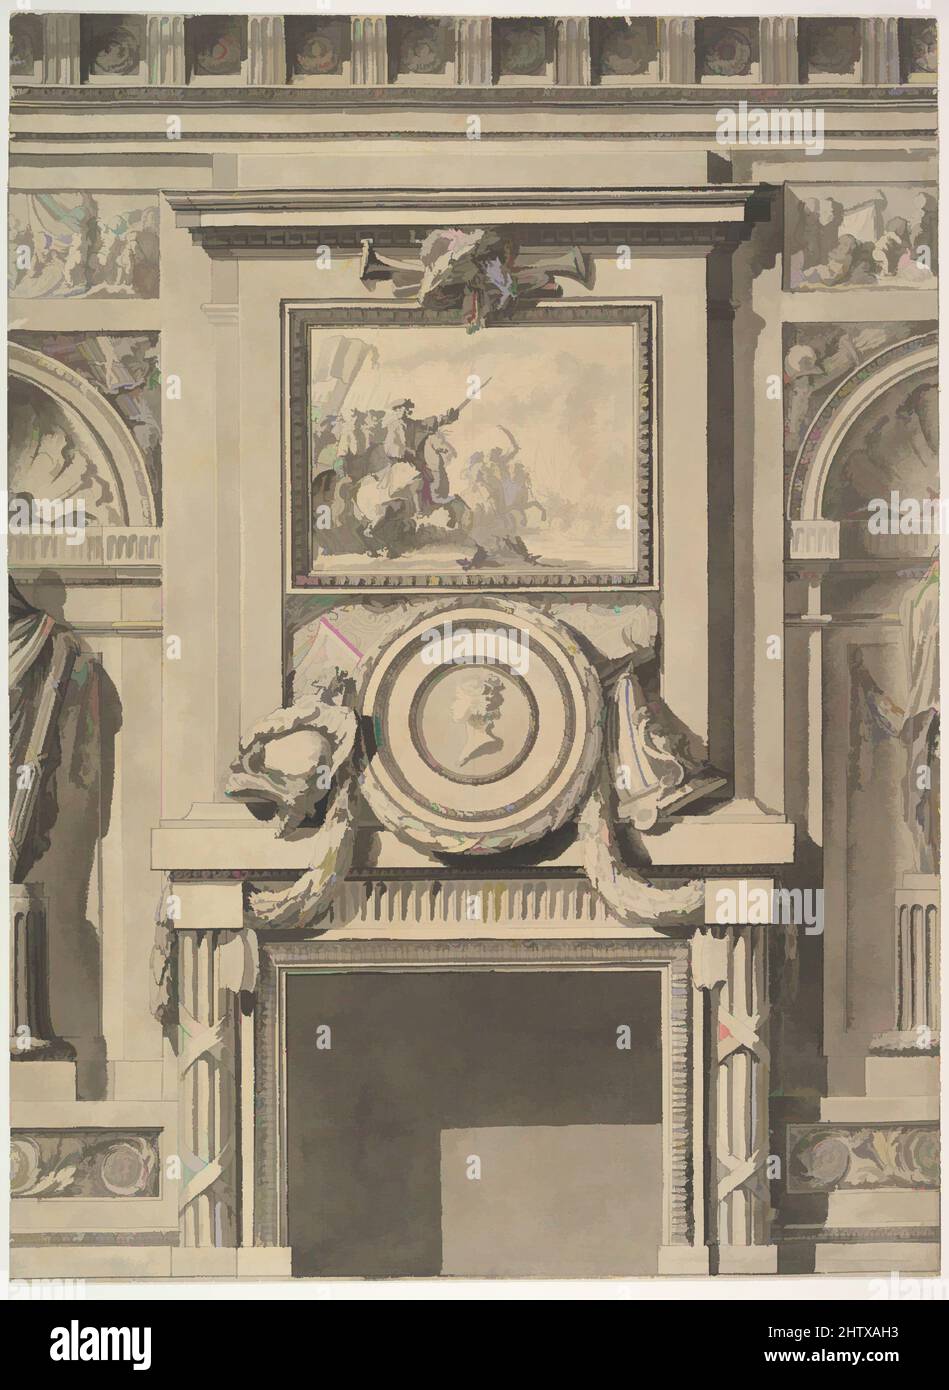 Art inspired by Design for a Chimneypiece, Pen and black ink, brush and gray wash, 15 9/16 x 11 9/16 in. (39.5 x 29.4 cm), Drawings, Jean Charles Delafosse (French, Paris 1734–1789 Paris, Classic works modernized by Artotop with a splash of modernity. Shapes, color and value, eye-catching visual impact on art. Emotions through freedom of artworks in a contemporary way. A timeless message pursuing a wildly creative new direction. Artists turning to the digital medium and creating the Artotop NFT Stock Photo